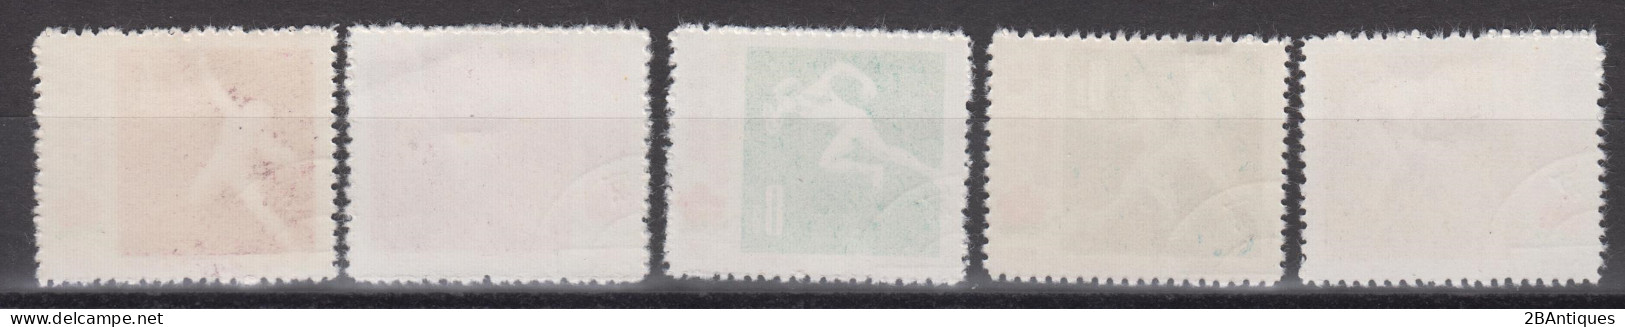 PR CHINA 1957 - The 1st Chinese Workers' Athletic Meeting CTO XF With Very Nice Cancellation! - Used Stamps